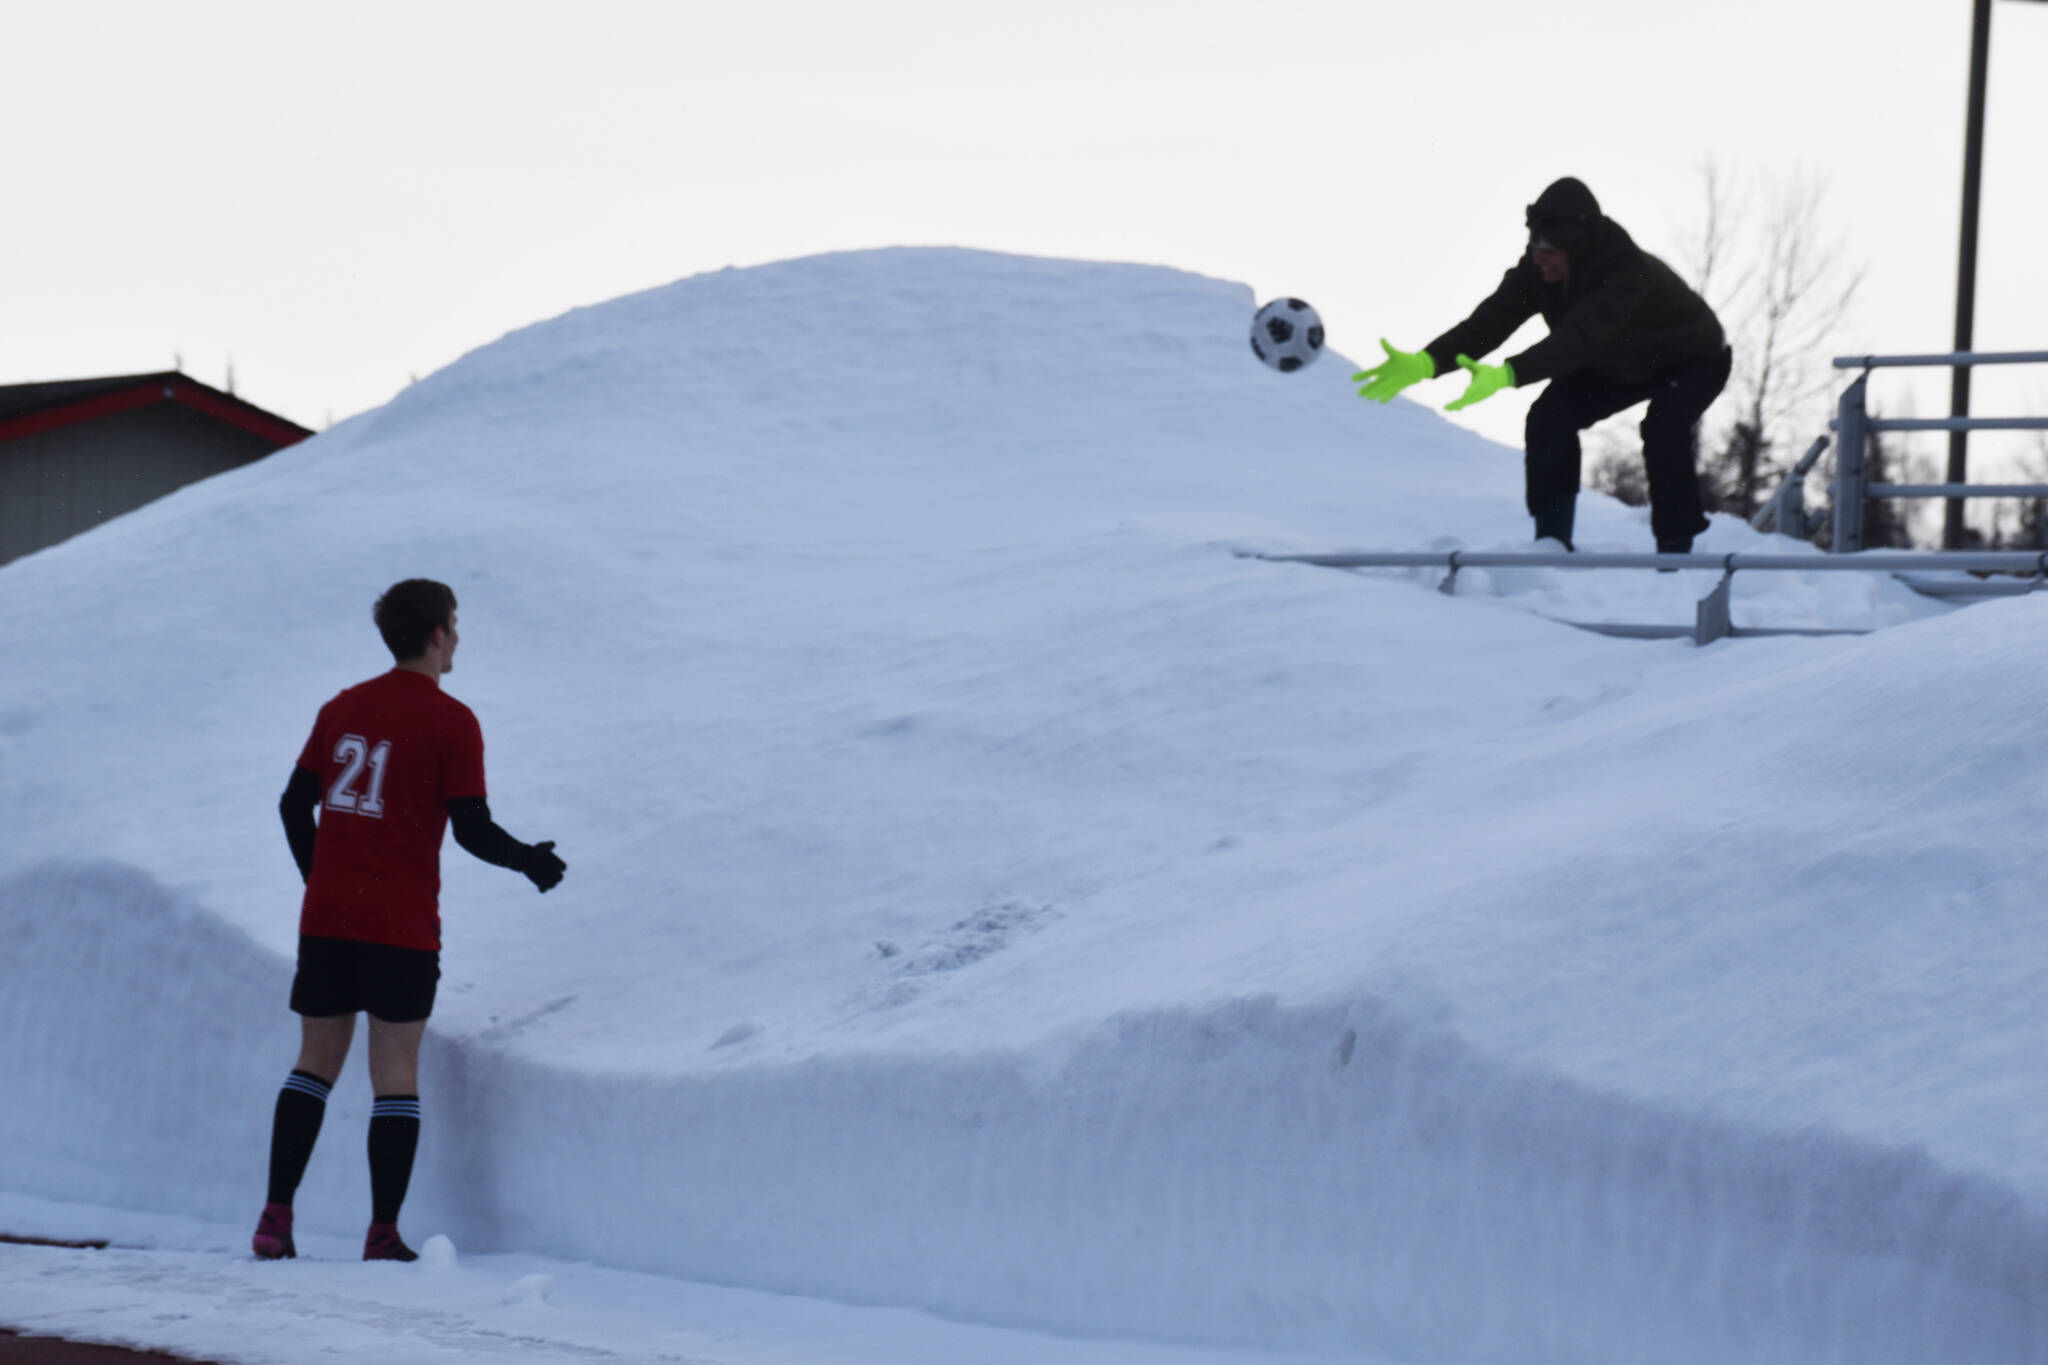 A spectator throws a ball lost in the snow back down to Bridger Beck during a soccer game at Ed Hollier Field in Kenai, Alaska, on Thursday, March 30, 2023. (Jake Dye/Peninsula Clarion)